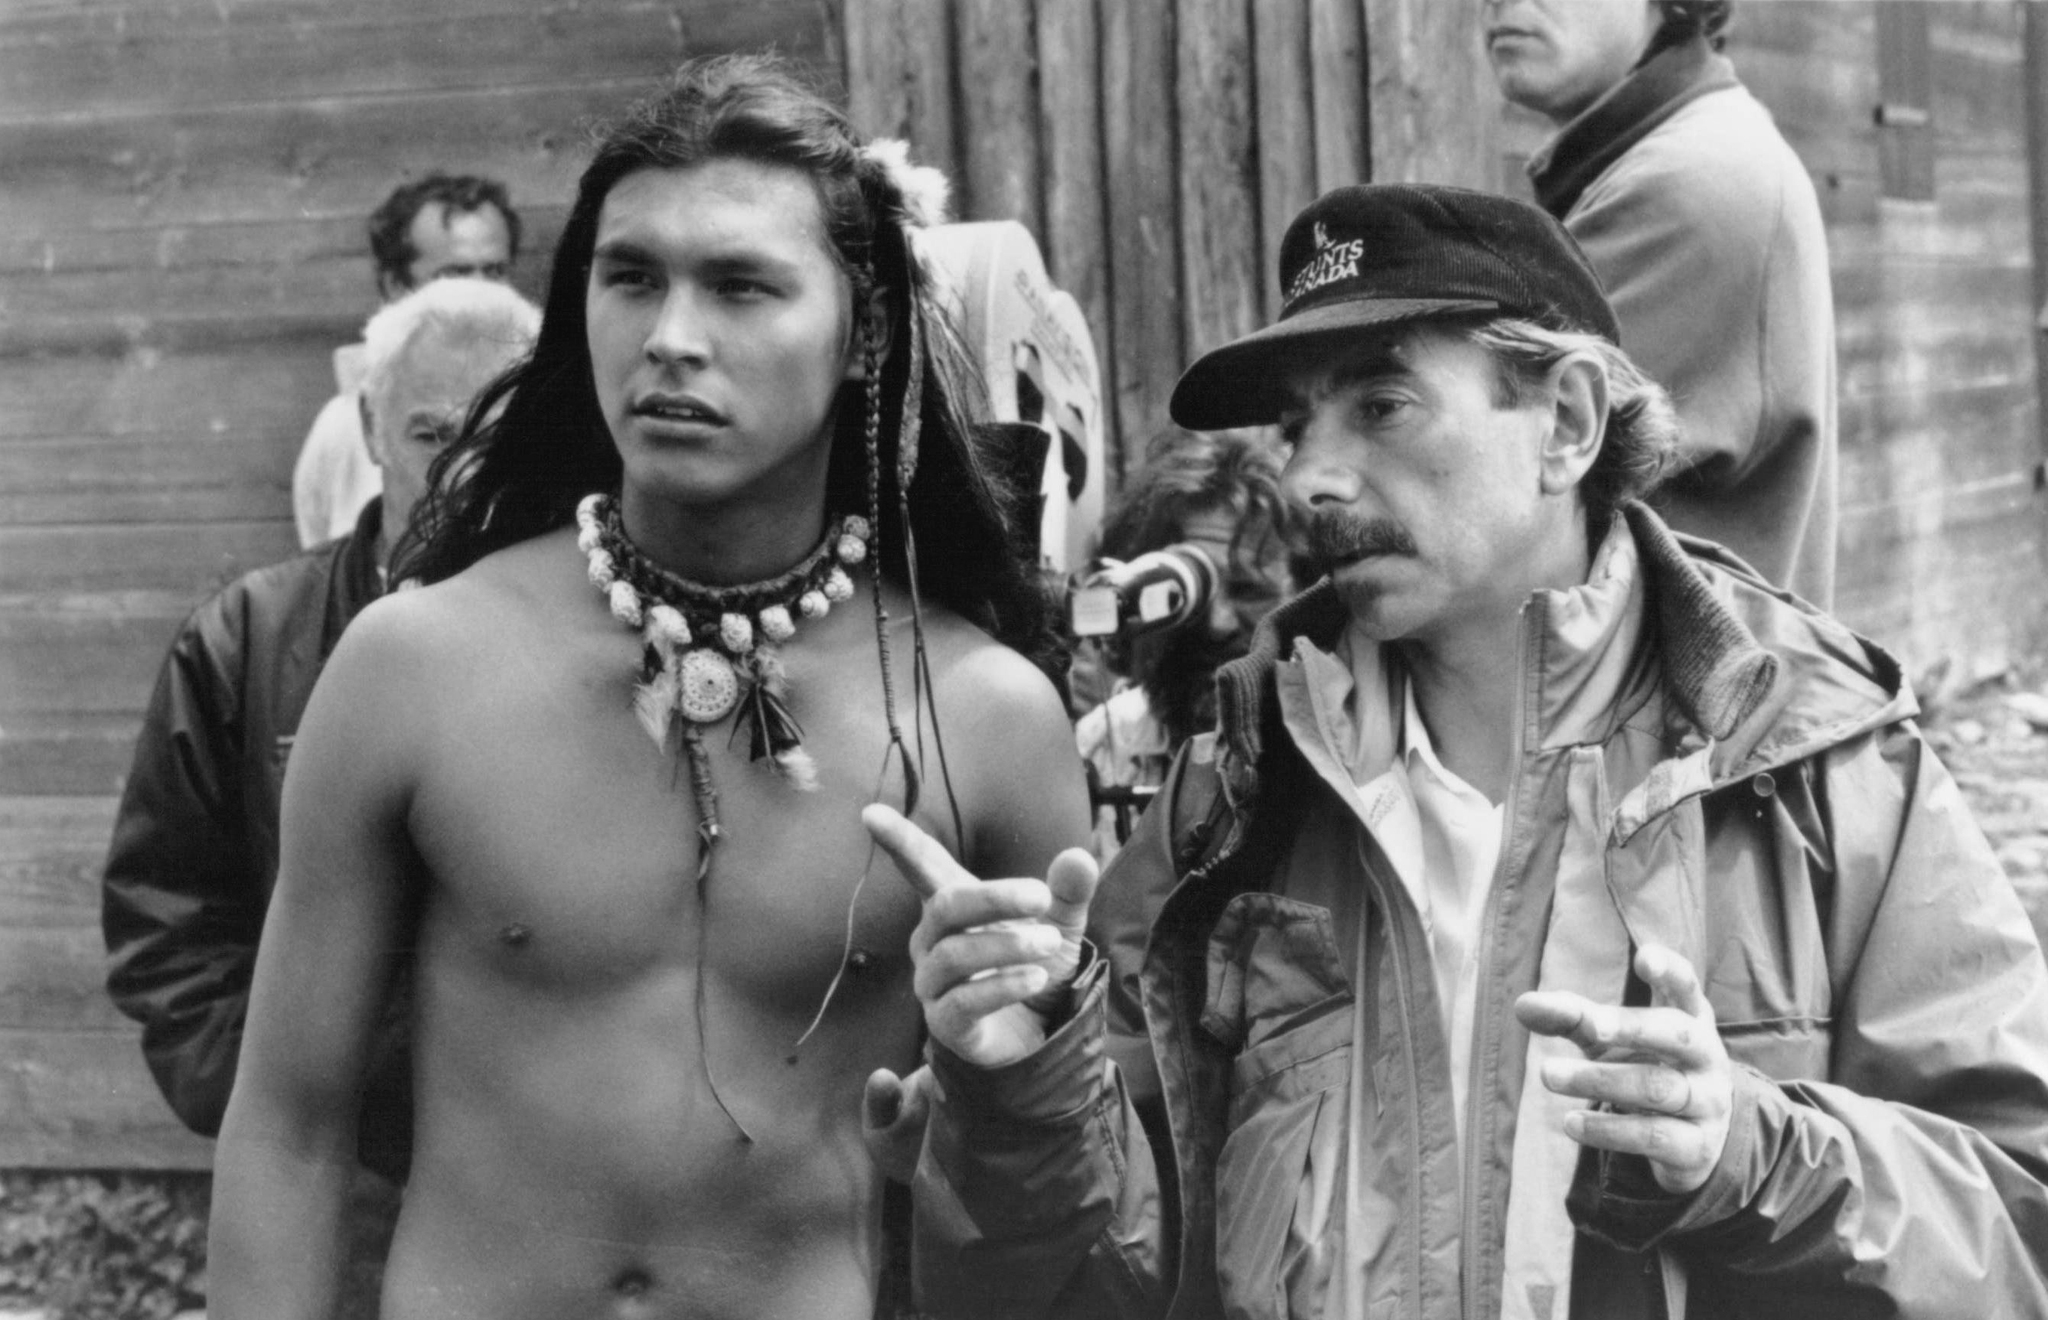 Still of Adam Beach and Sheldon Peters Wolfchild in Squanto: A Warrior's Tale (1994)